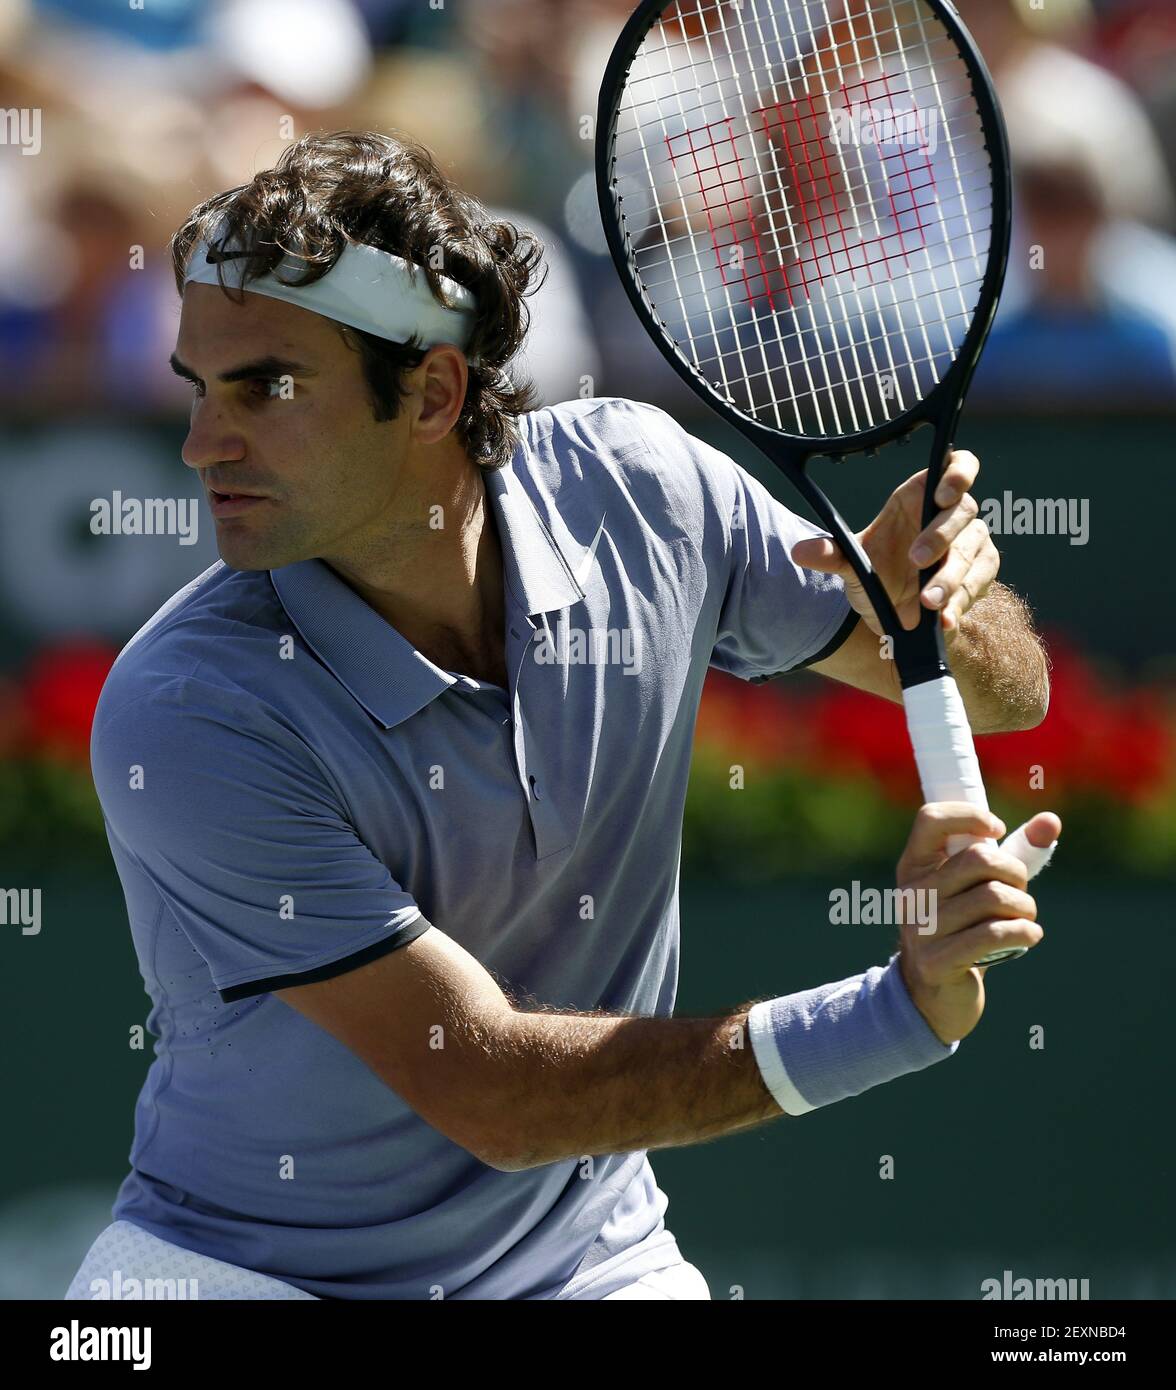 15 March, 2014: Roger Federer of Switzerland hits a return to Alexandr  Dolgopolov of the Ukraine during the BNP Paribas Open at Indian Wells  Tennis Garden in Indian Wells CA. (Photo by